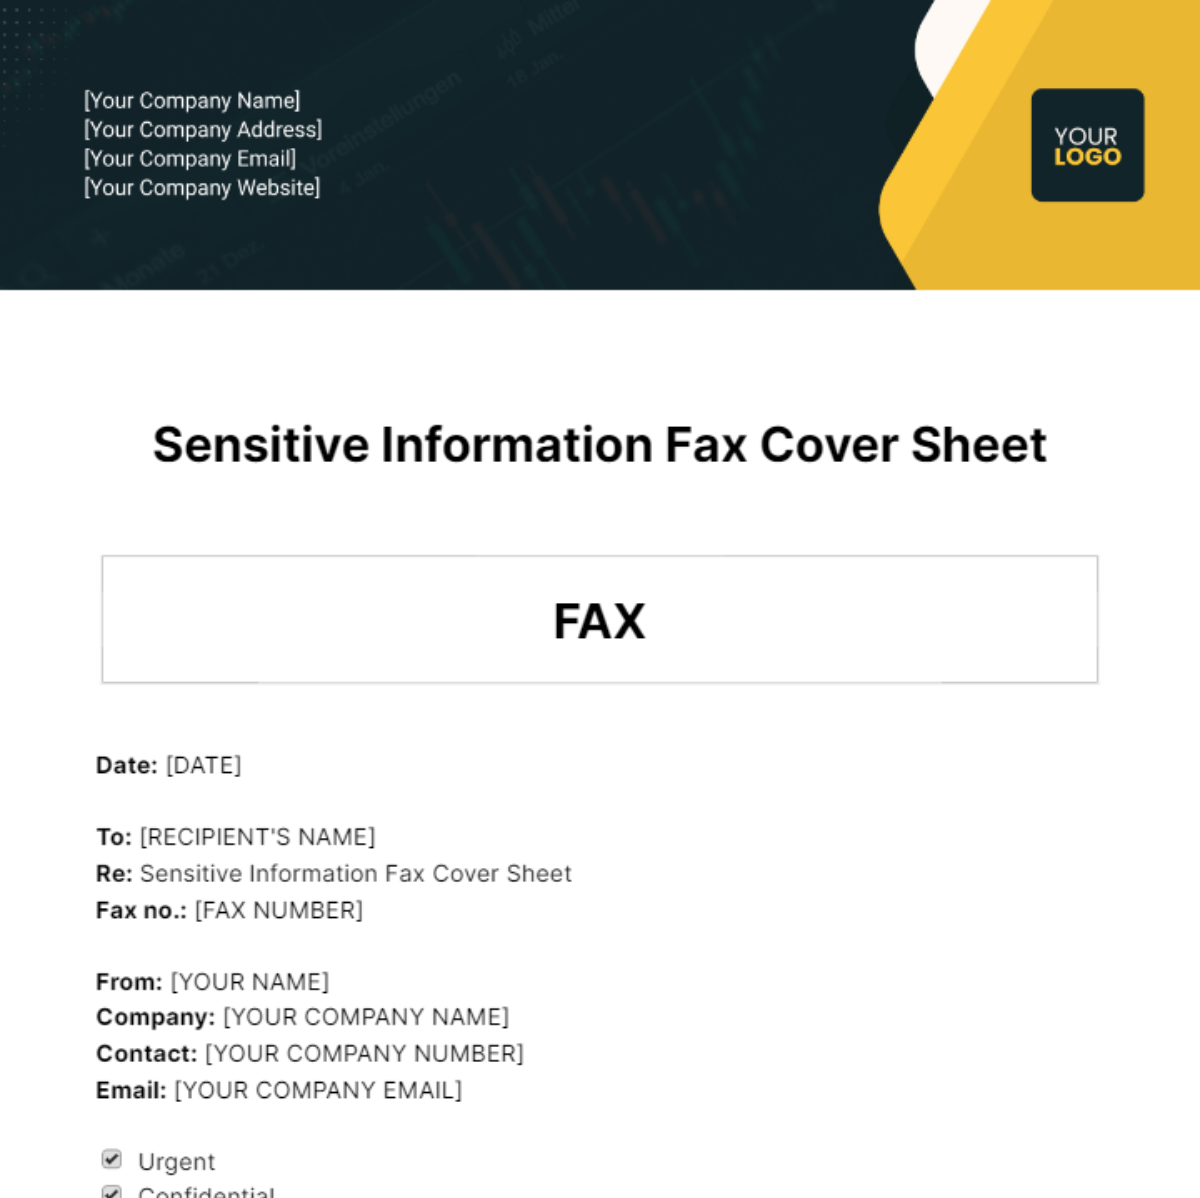 Free Sensitive Information Fax Cover Sheet Template